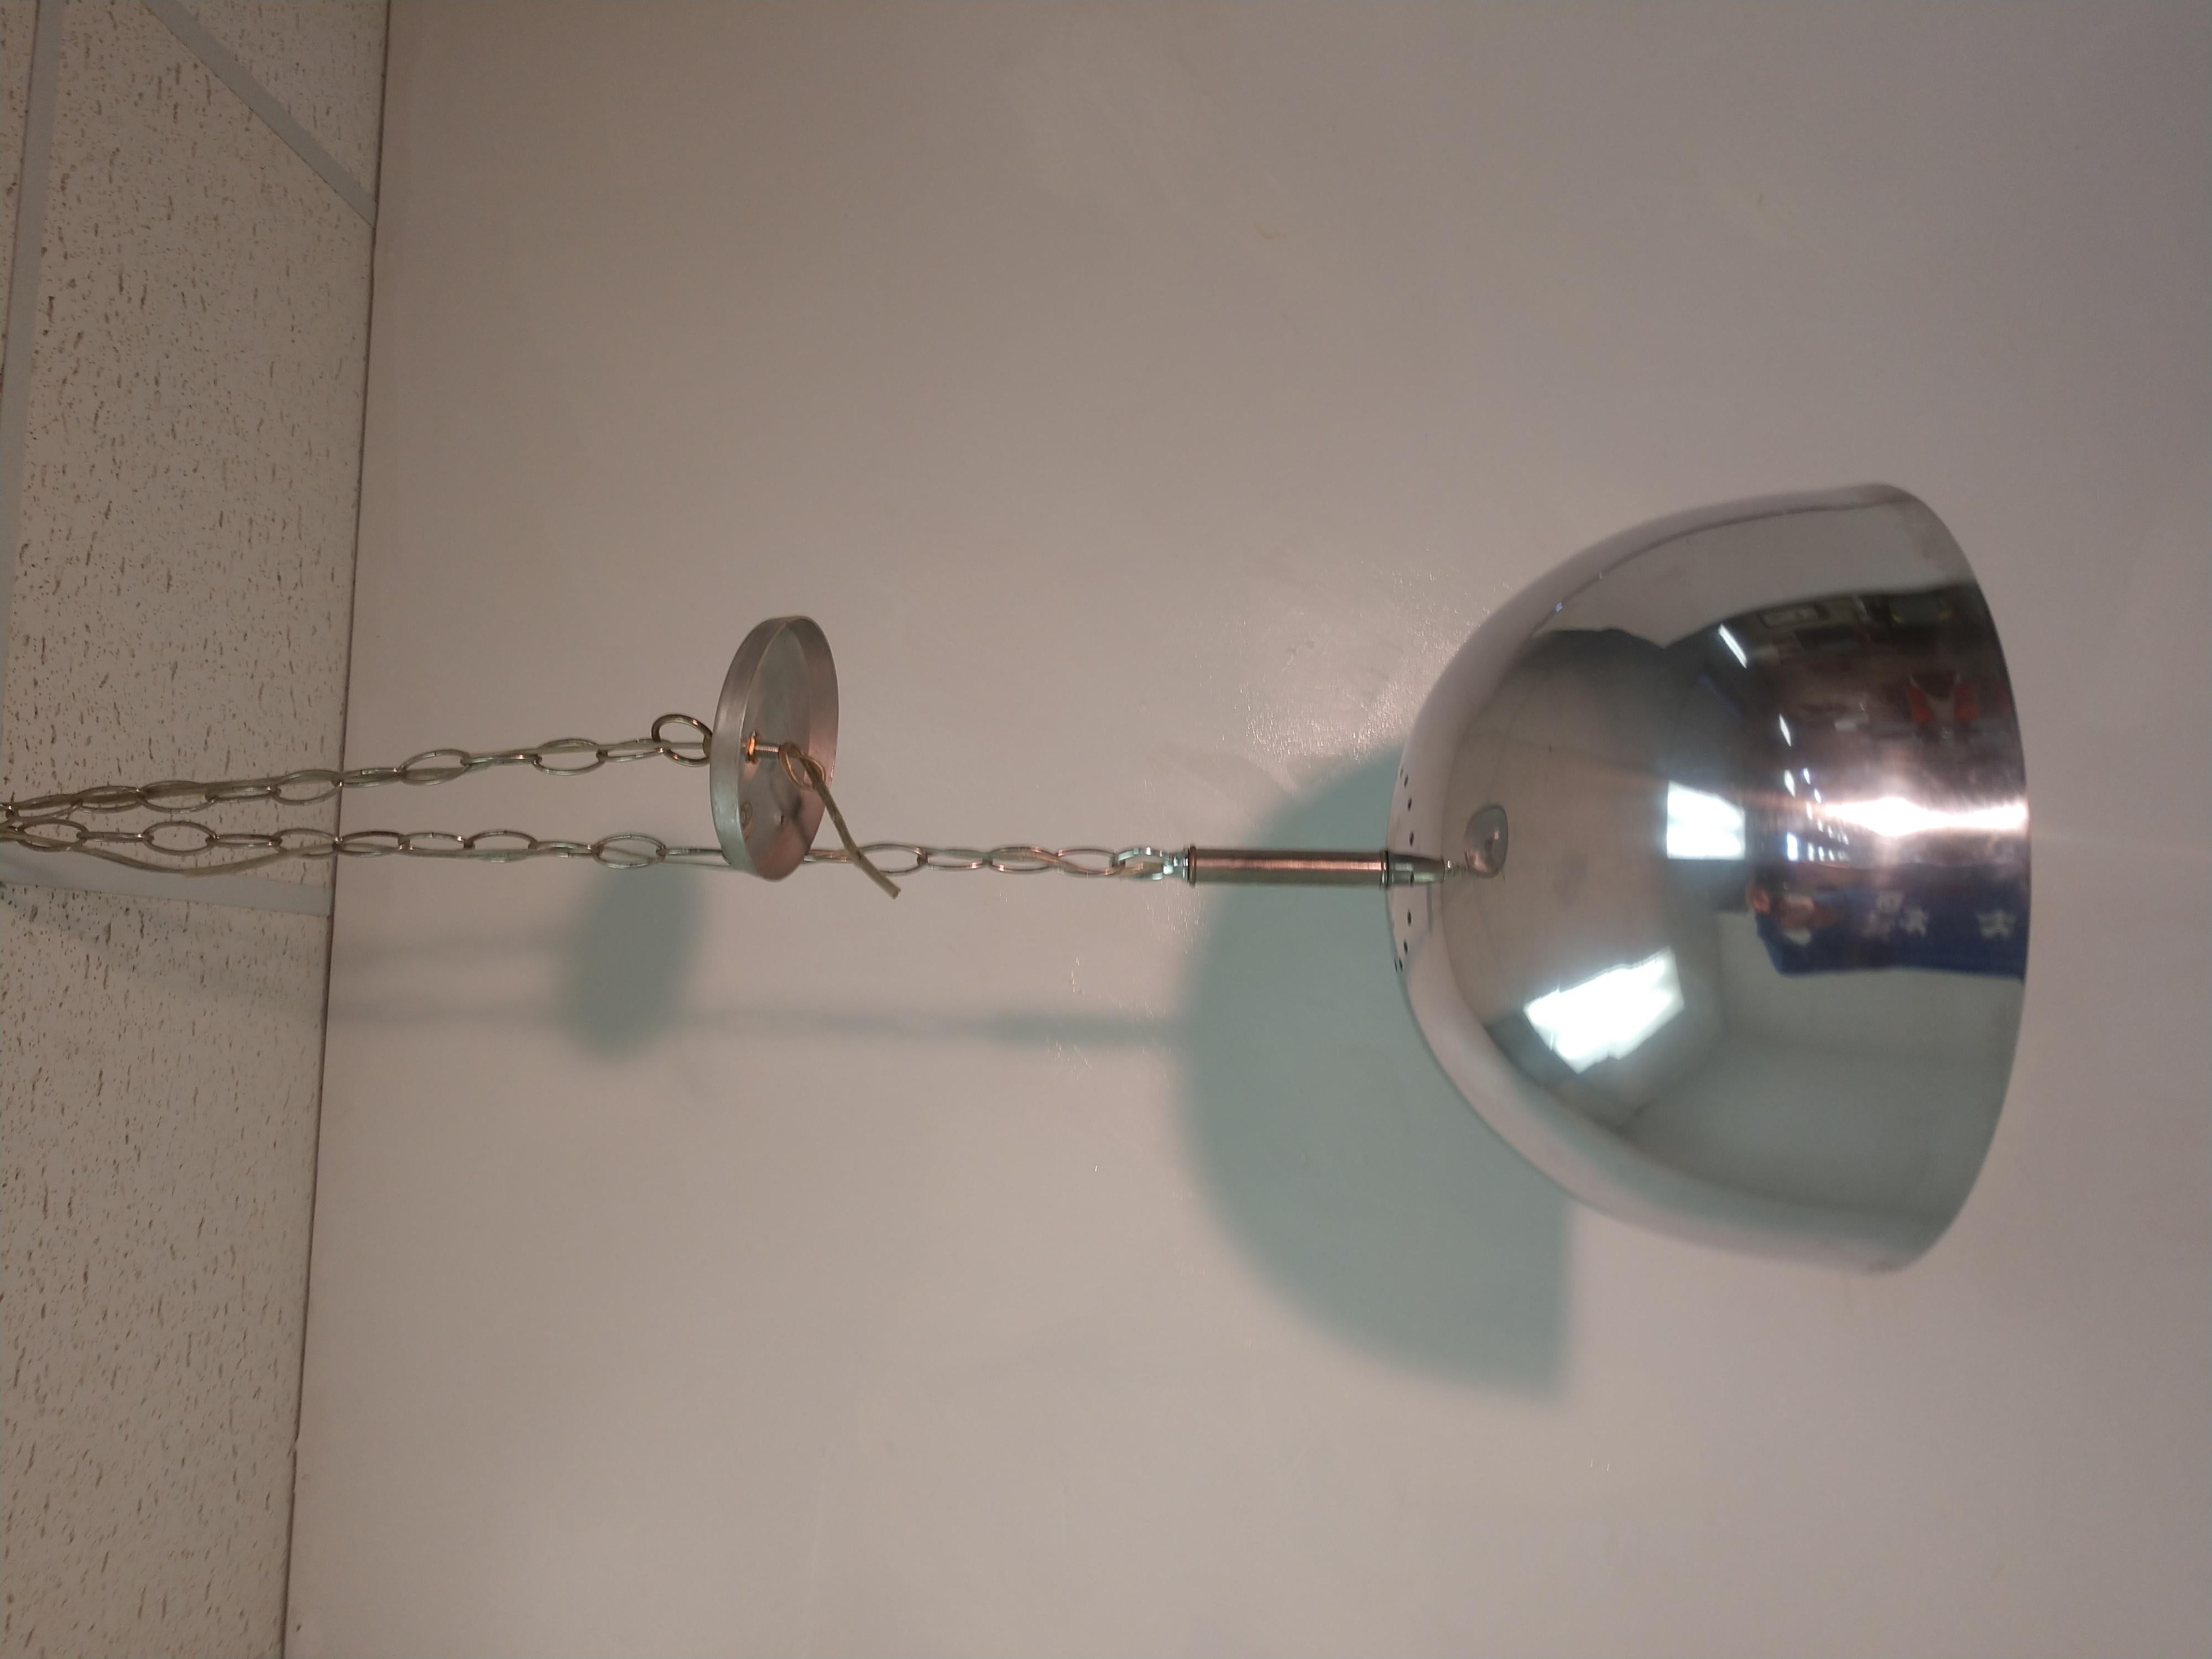 Chrome pendant lamp with milk glass ball diffuser.
Hanging lamp with adjustable chain to suit your desired height, 36 inches of chain, fixture is 17 in hgt. x 15.75 diameter. Chrome has a minor blemish, last pic. Aluminum canopy. Wiring is sound.